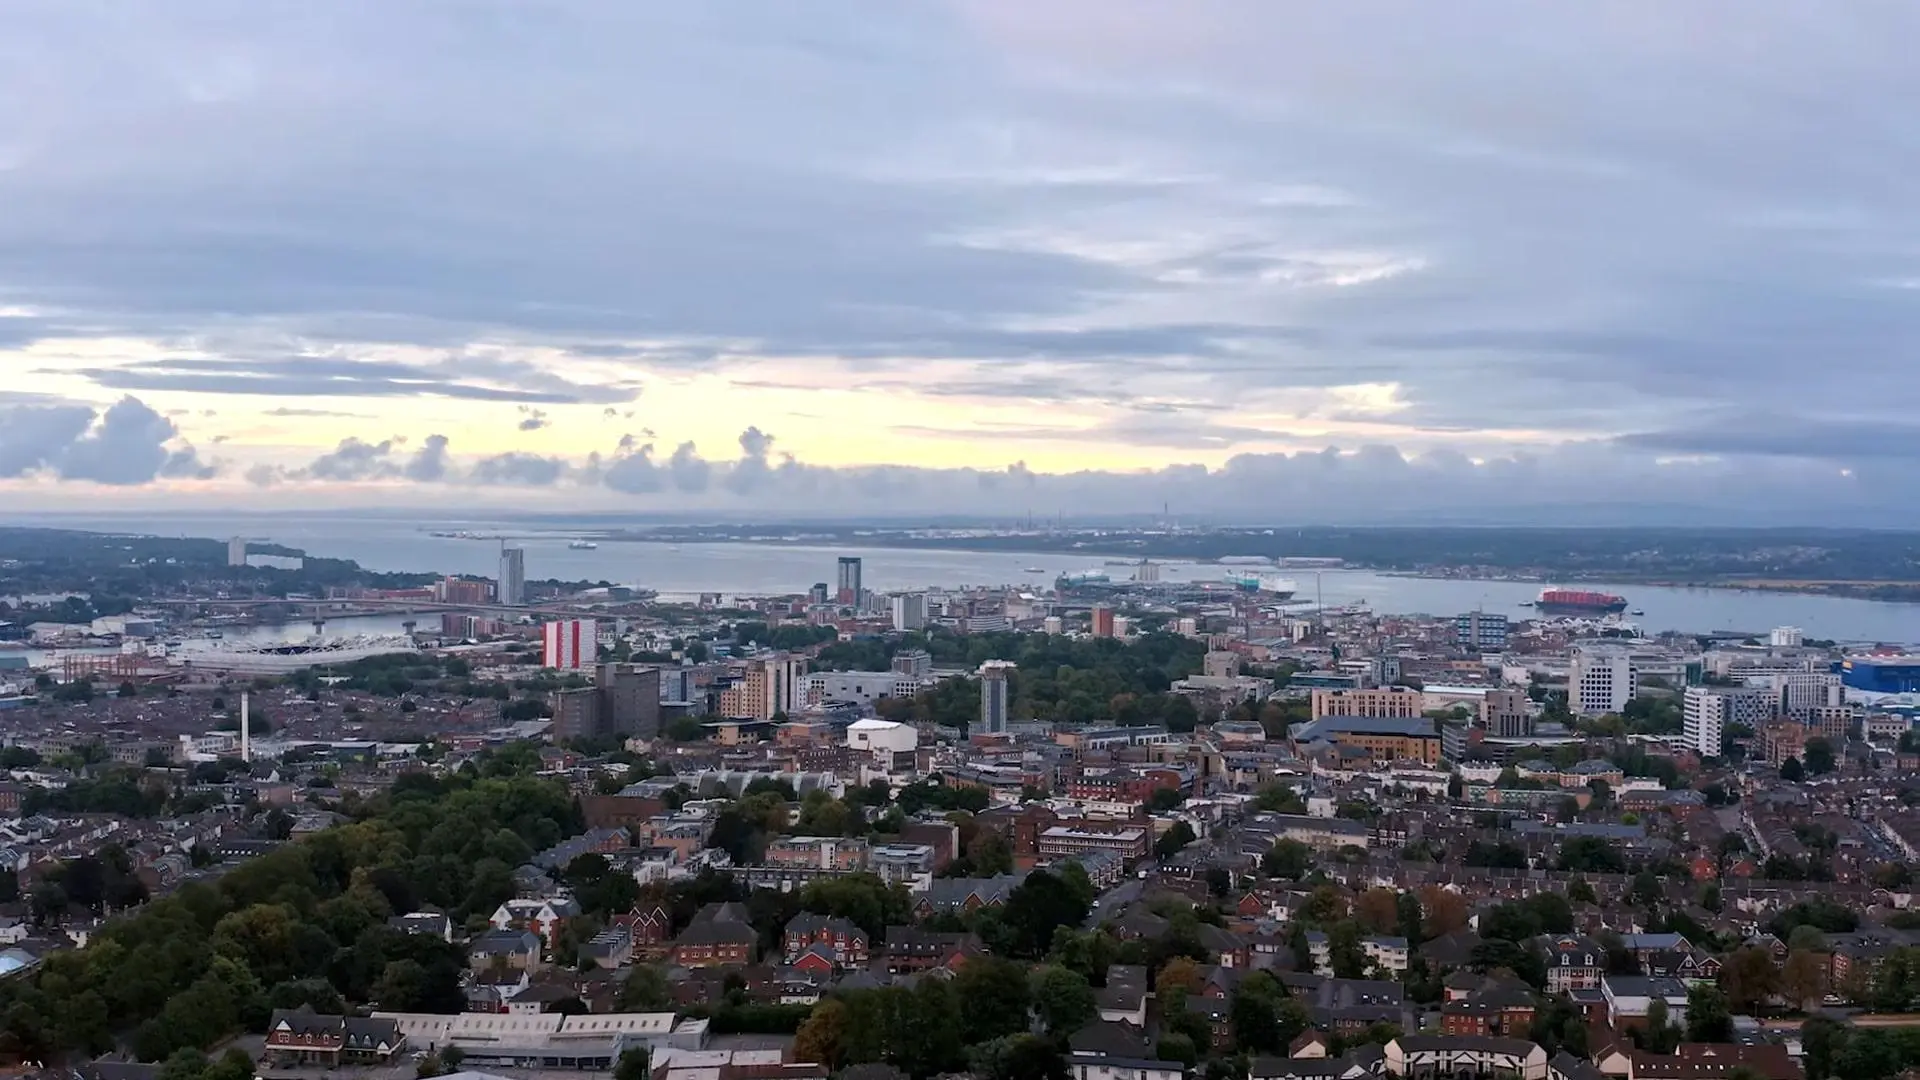 An image of Southampton from the sky